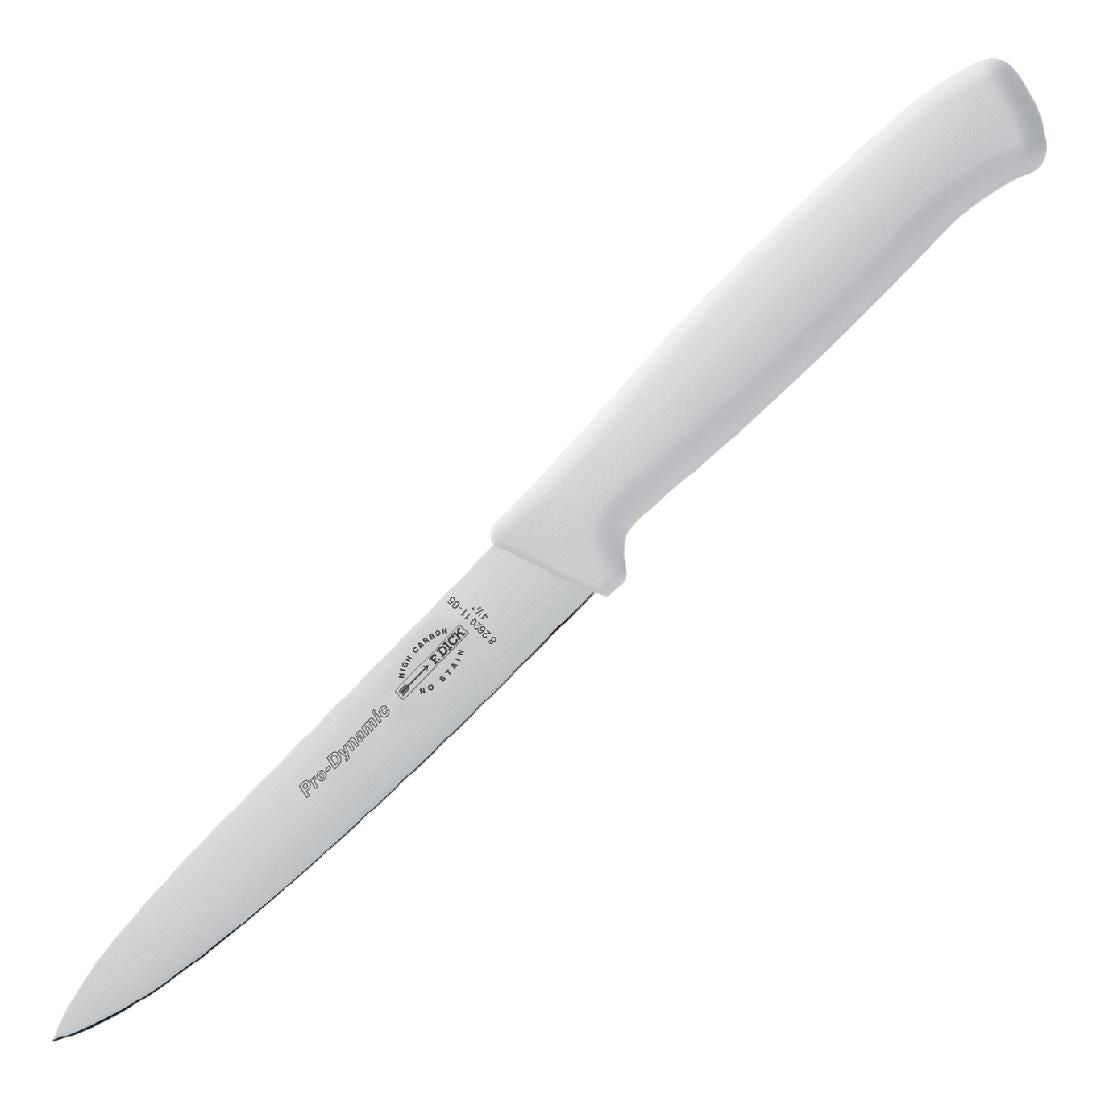 DL372 Dick Pro Dynamic HACCP Kitchen Knife White 11cm JD Catering Equipment Solutions Ltd